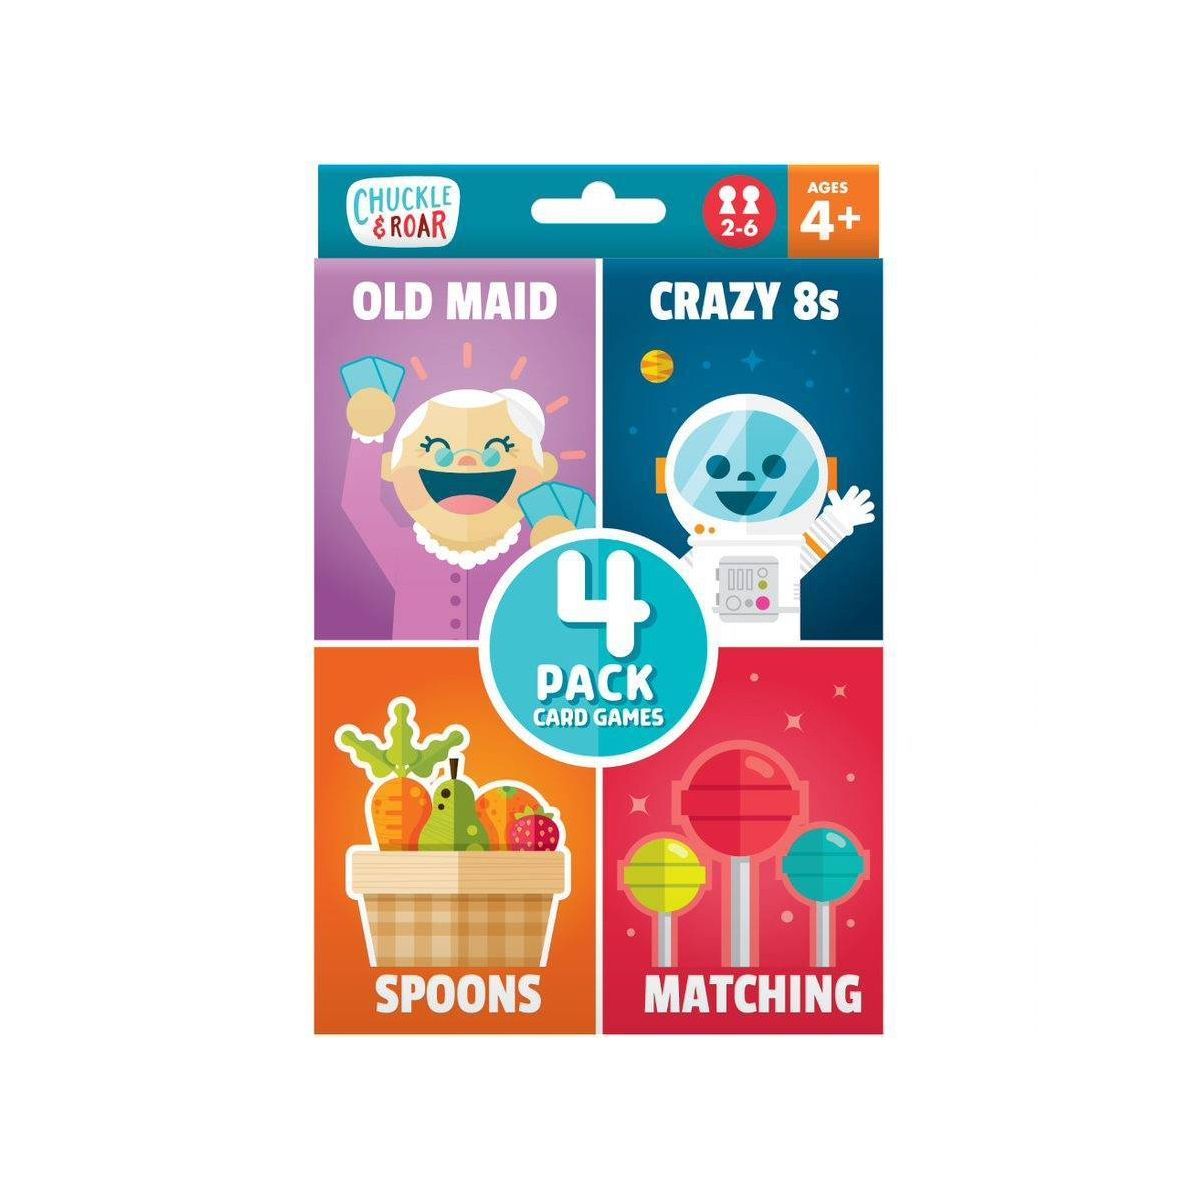 Chuckle & Roar Old Maid, Spoons, Matching and Crazy 8s Classic Card Games | Target